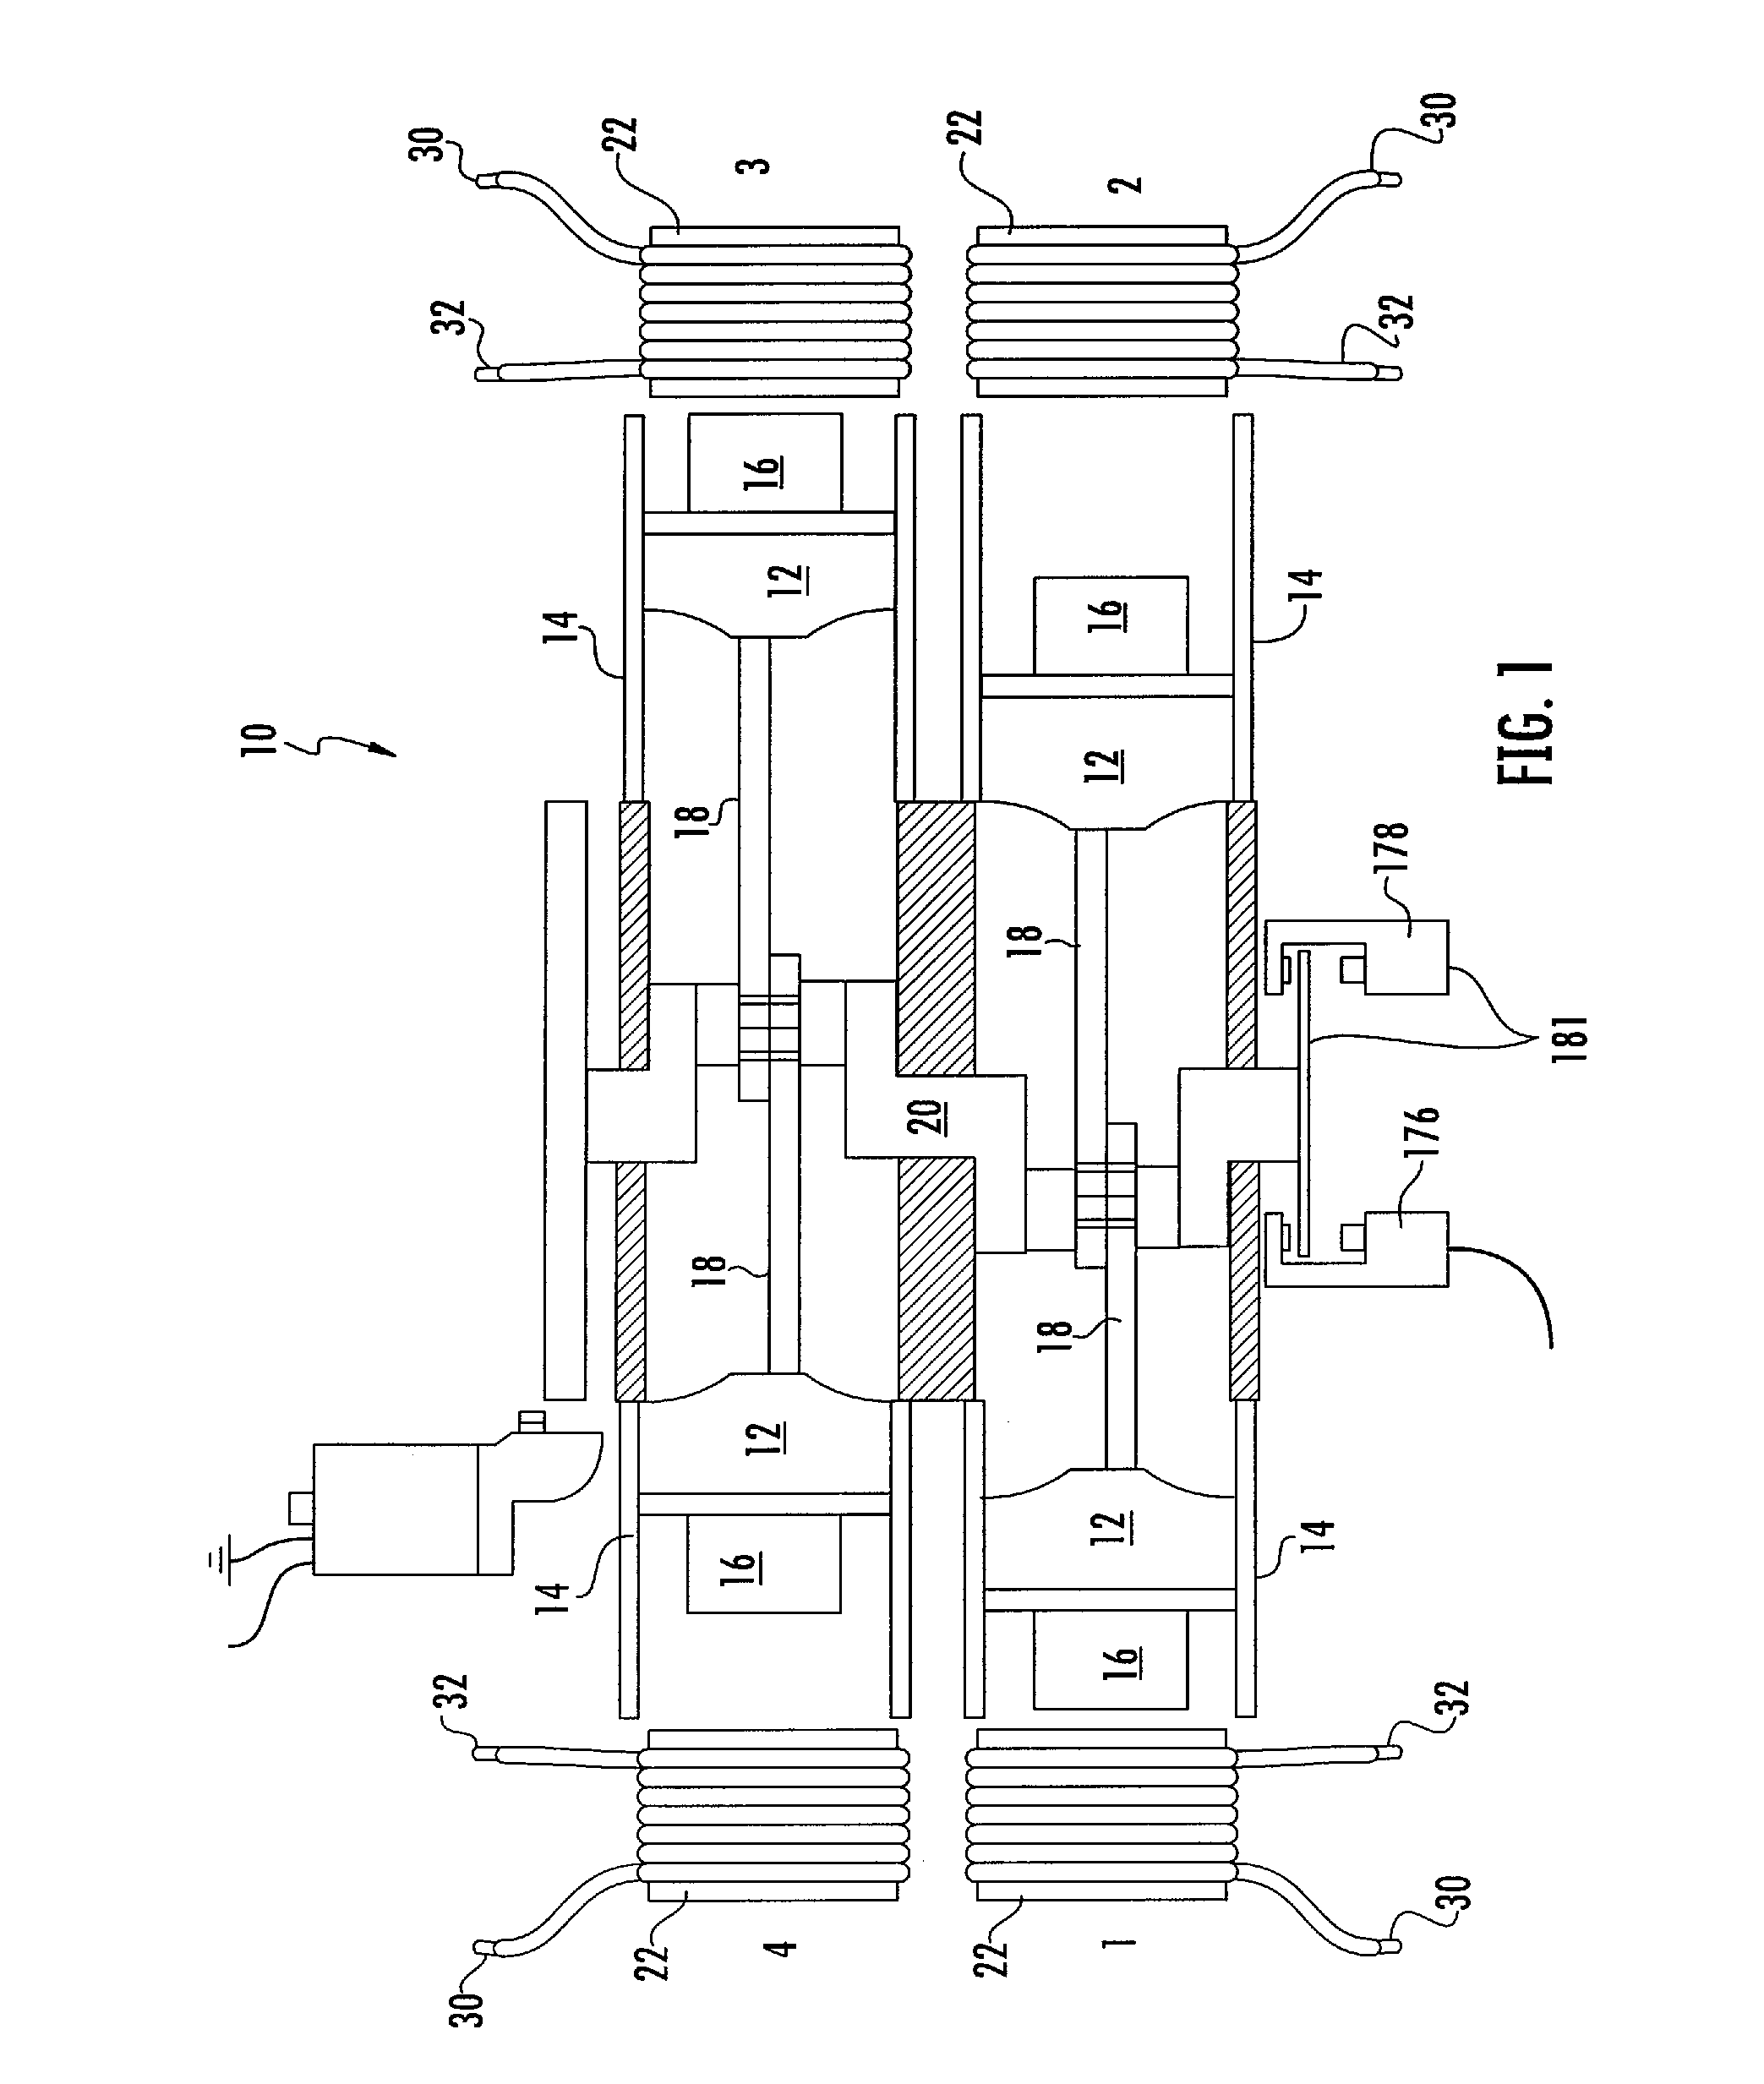 Device and Control System for Producing Electrical Power